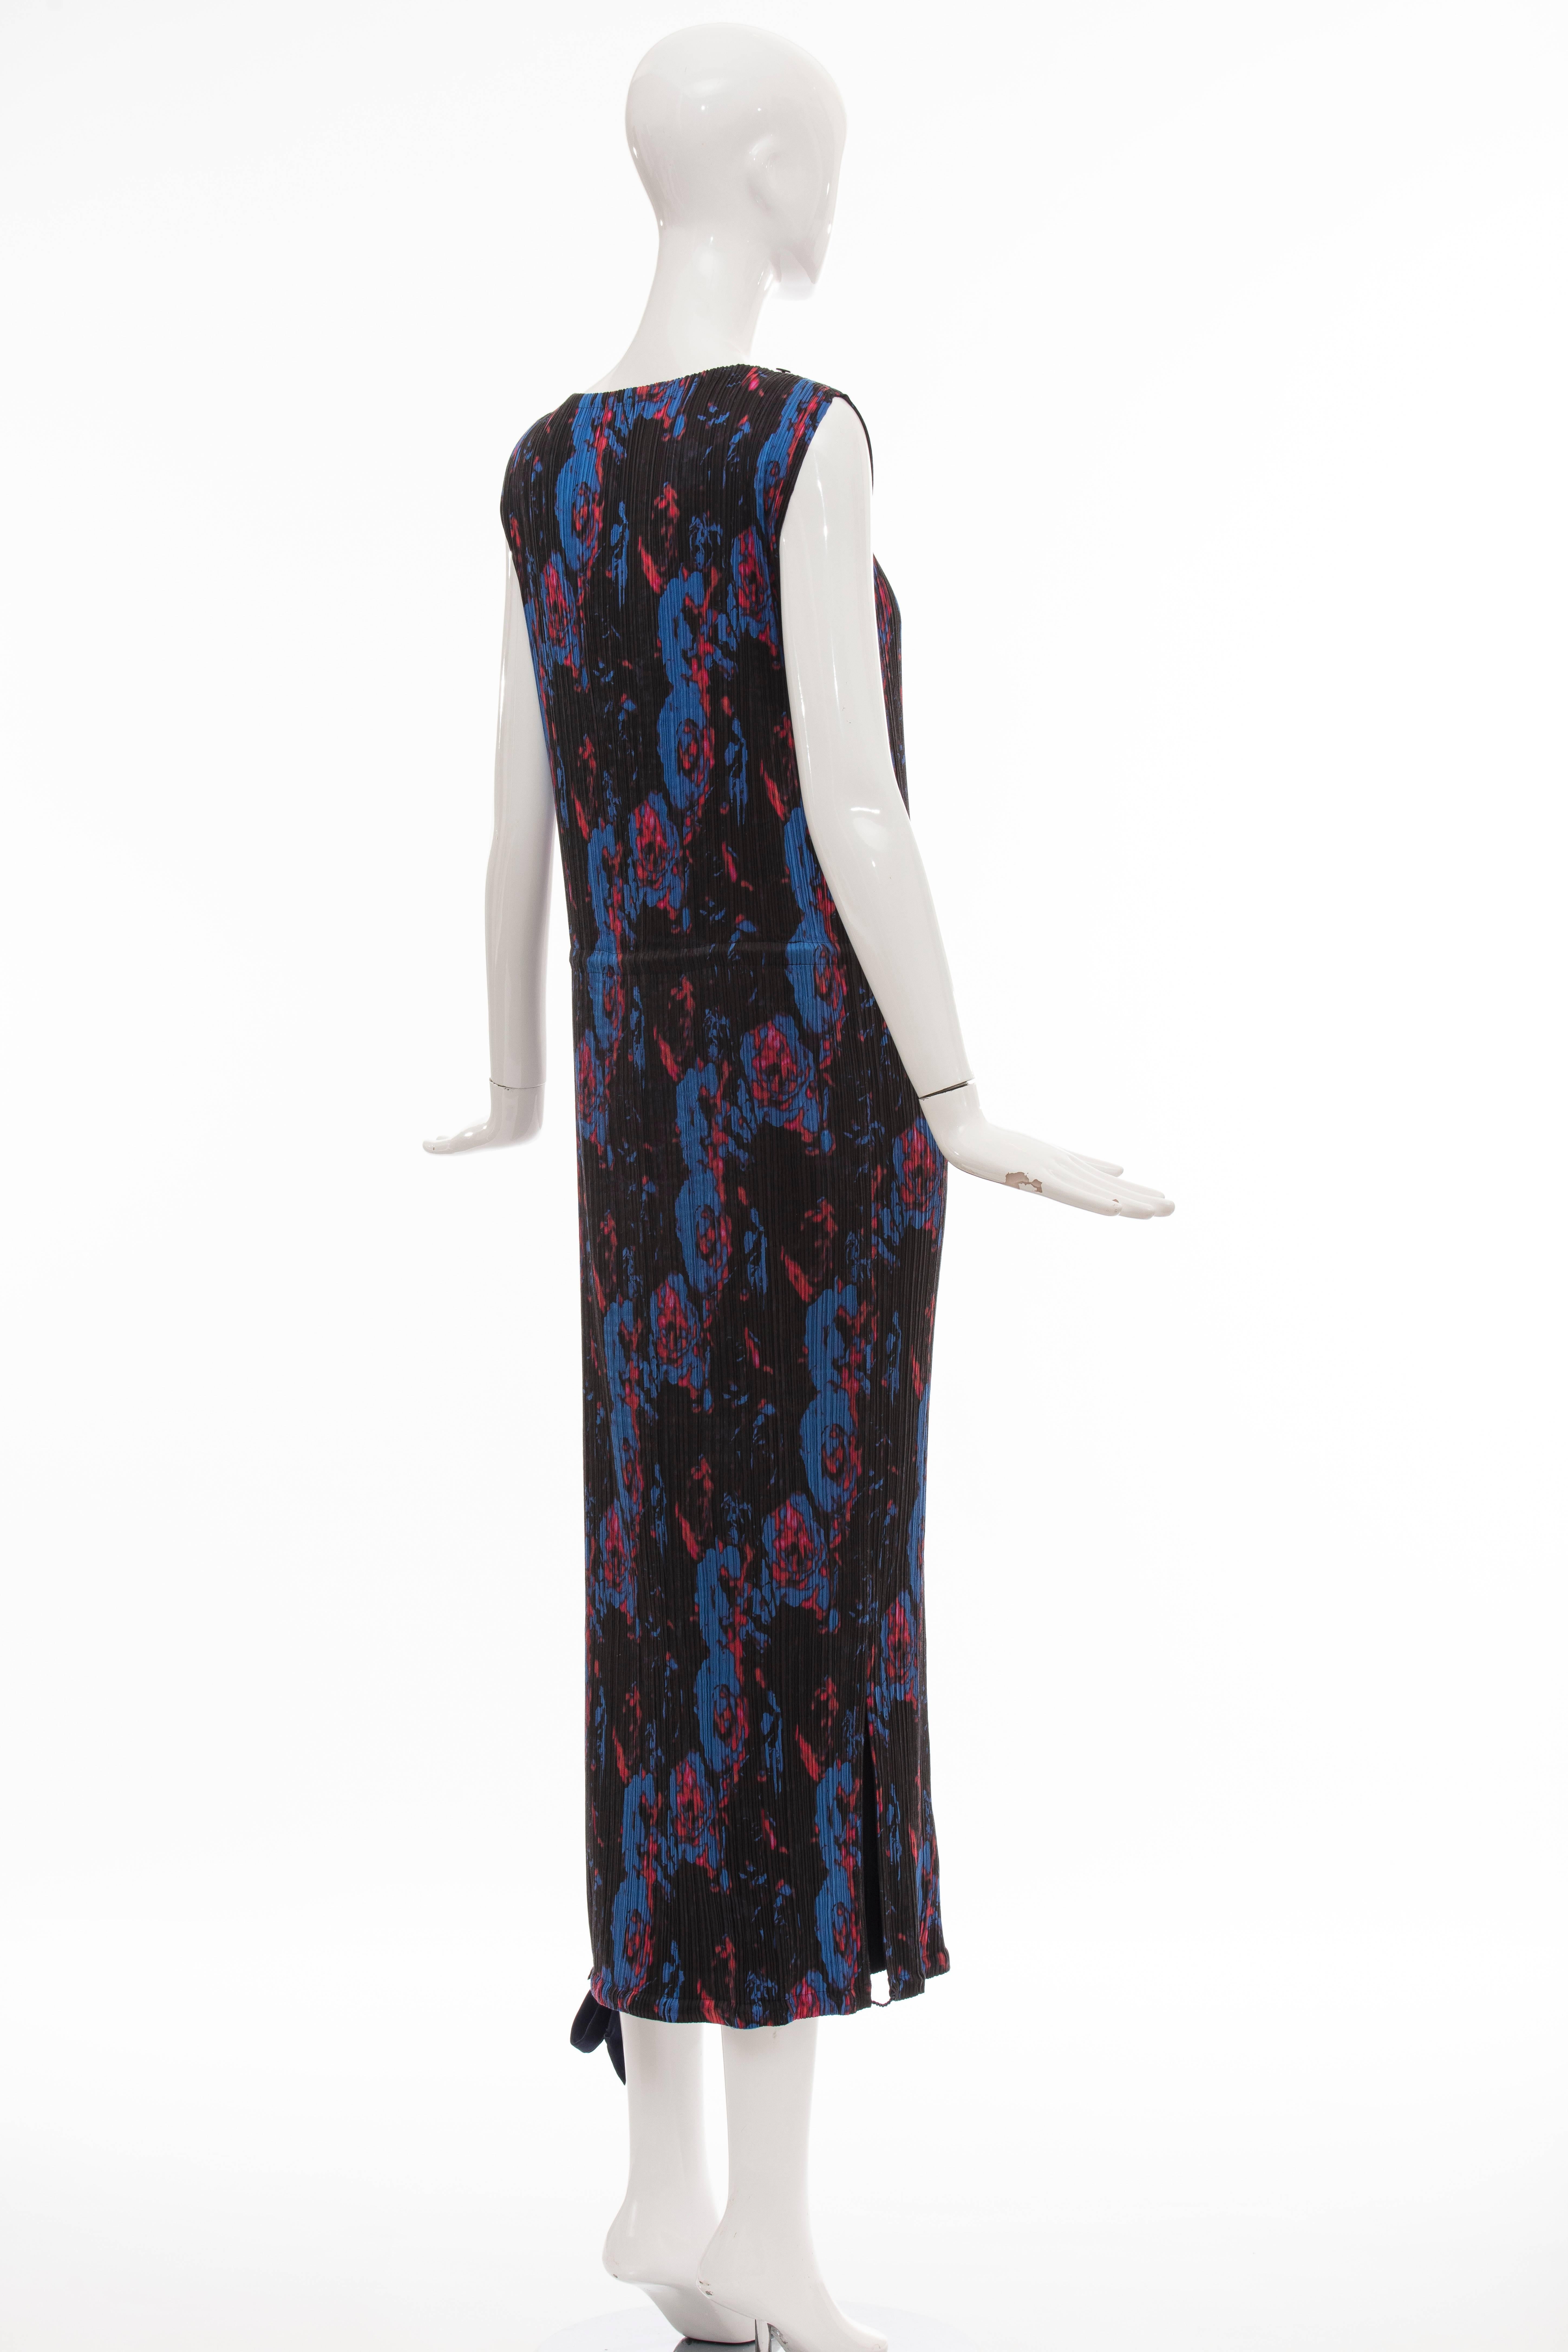 Issey Miyake Sleeveless Navy Blue Printed Silk Pleated Dress, Spring 2007 For Sale 2